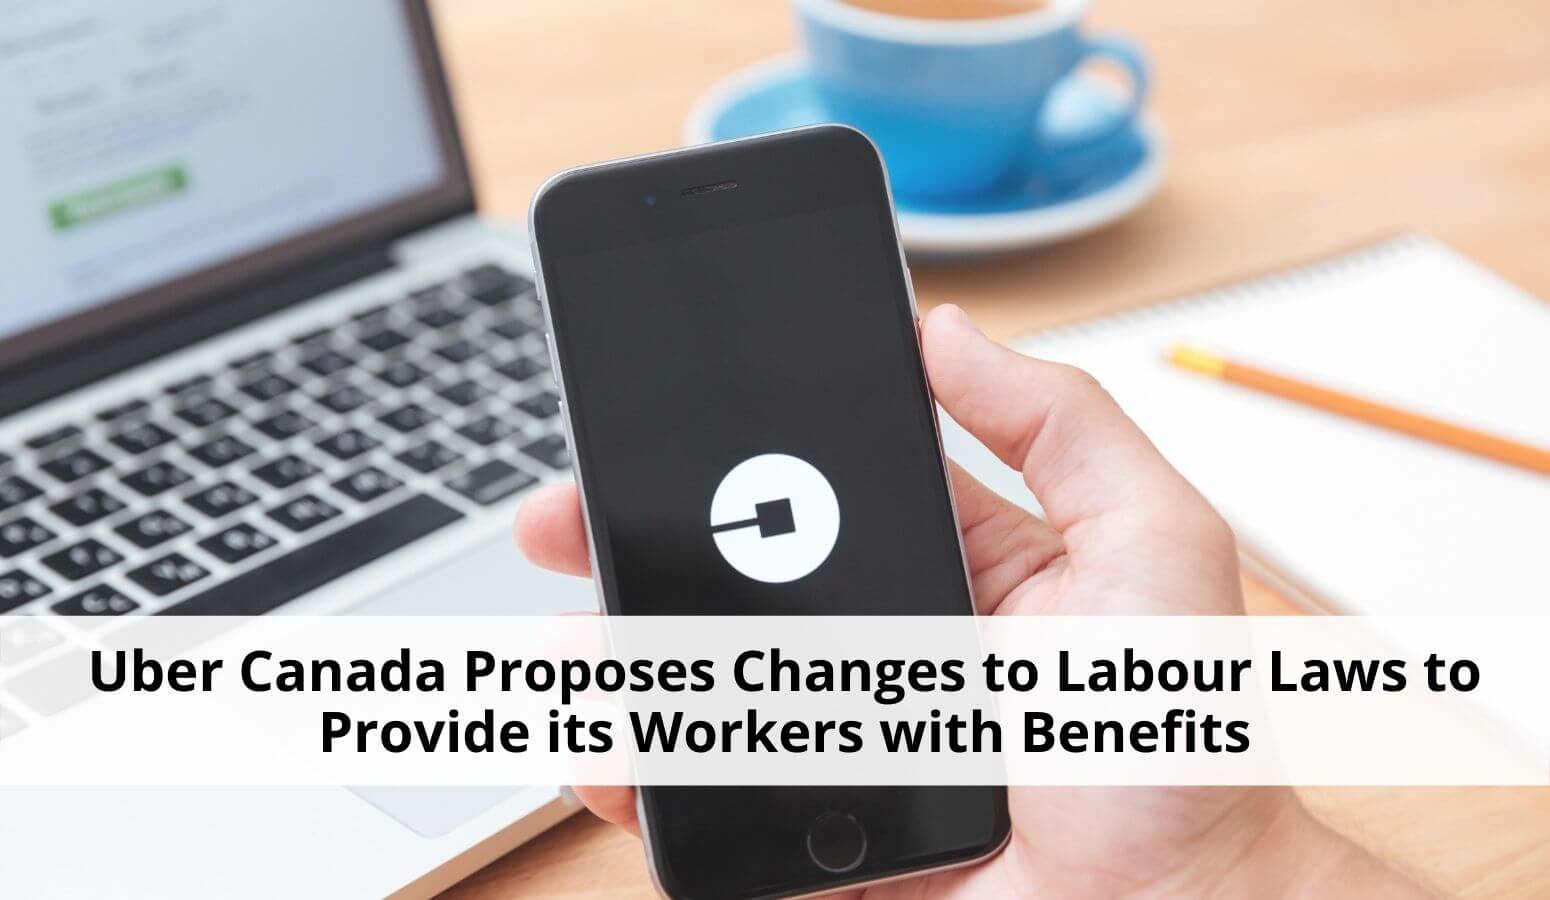 Featured image for “Uber’s Flexible Work+ – Uber Canada Proposes Changes to Labour Laws”